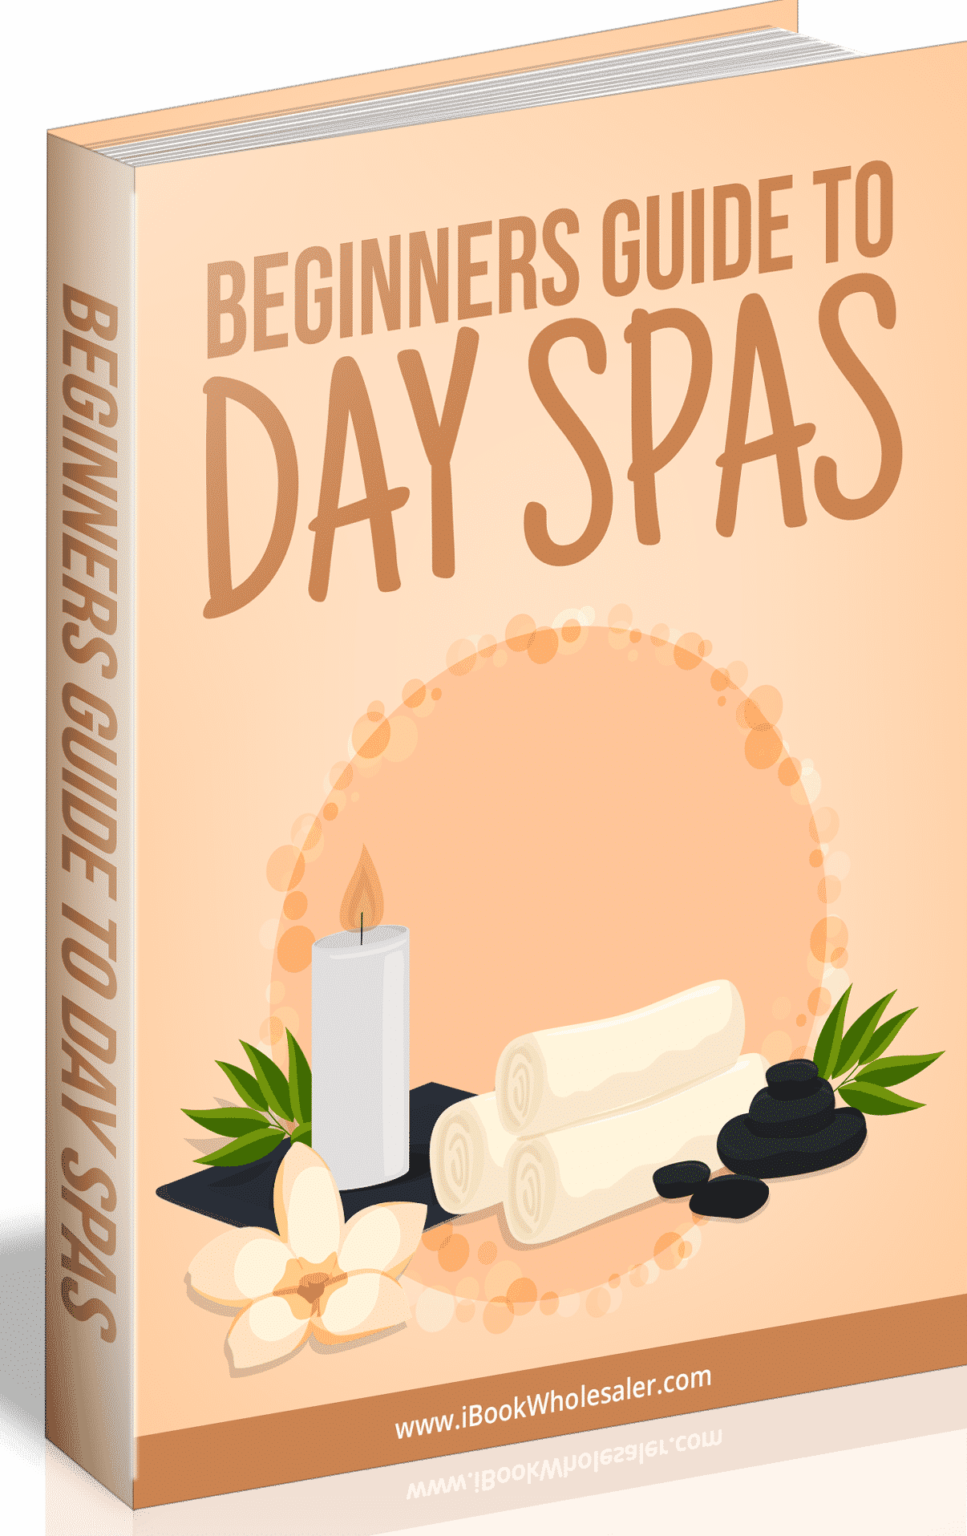 Beginners Guide To Day Spas Download Plr Ebook